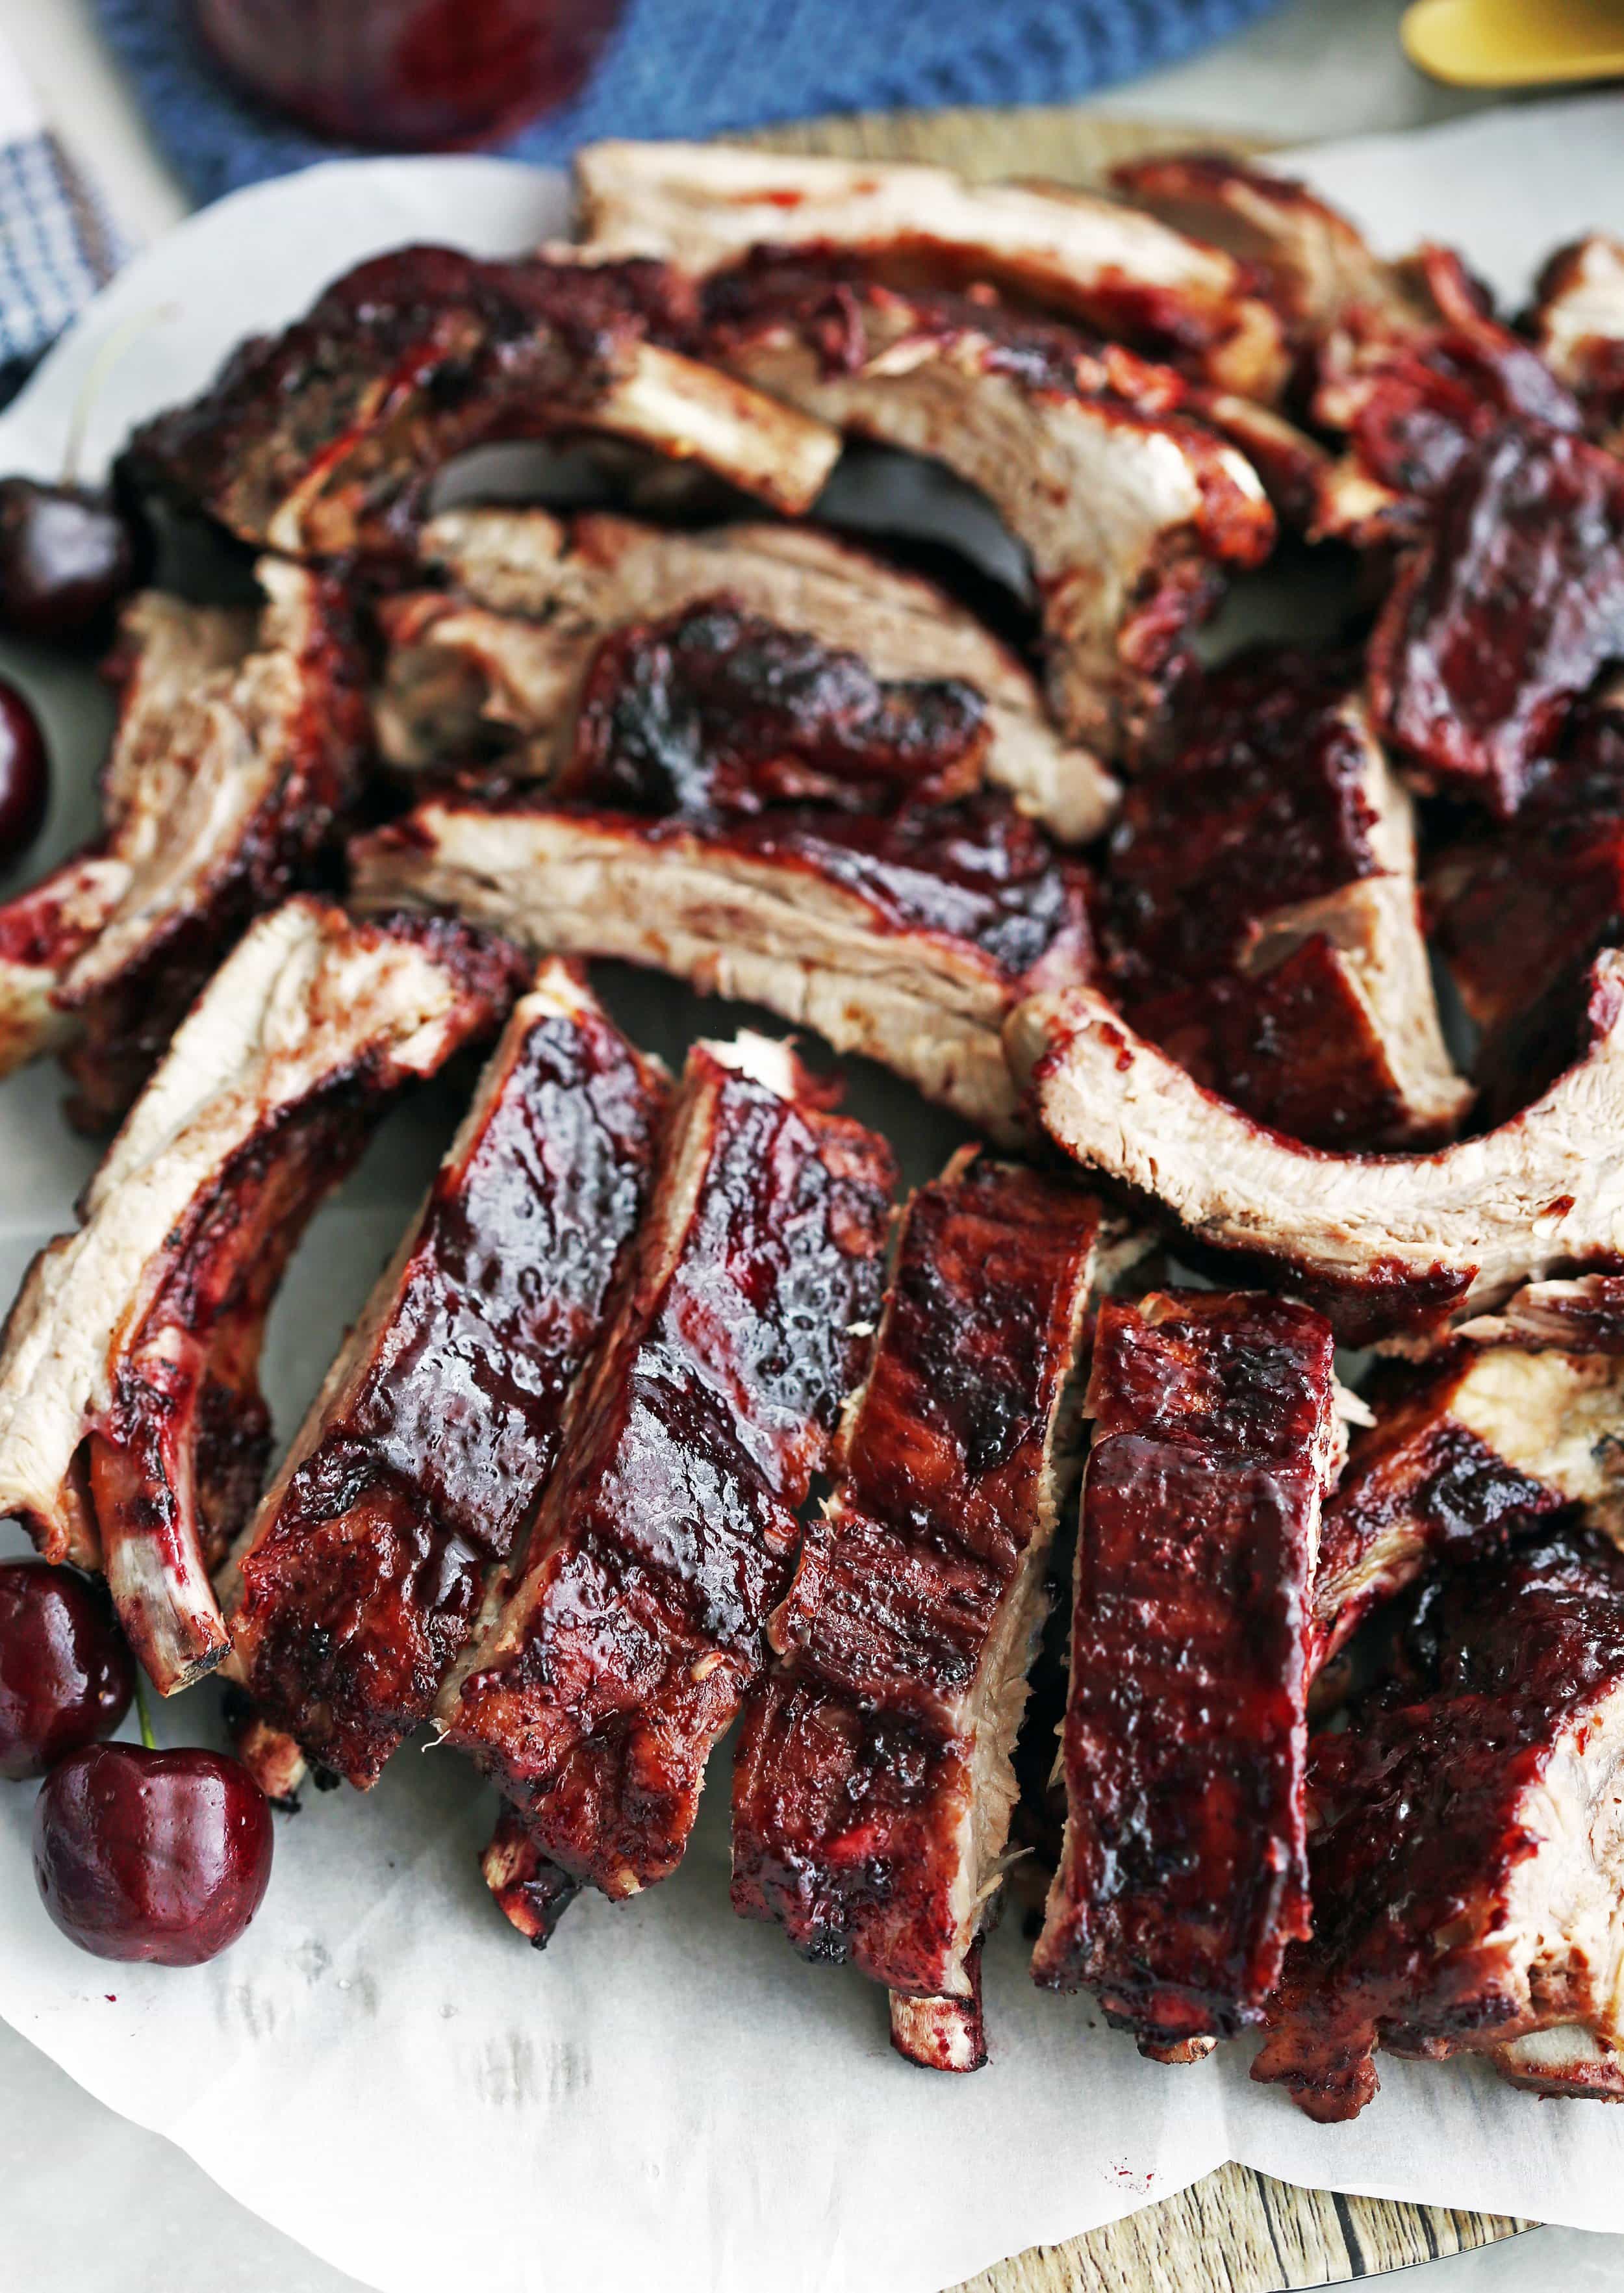 Sliced baby back ribs smothered with cherry chipotle sauce on white parchment paper.